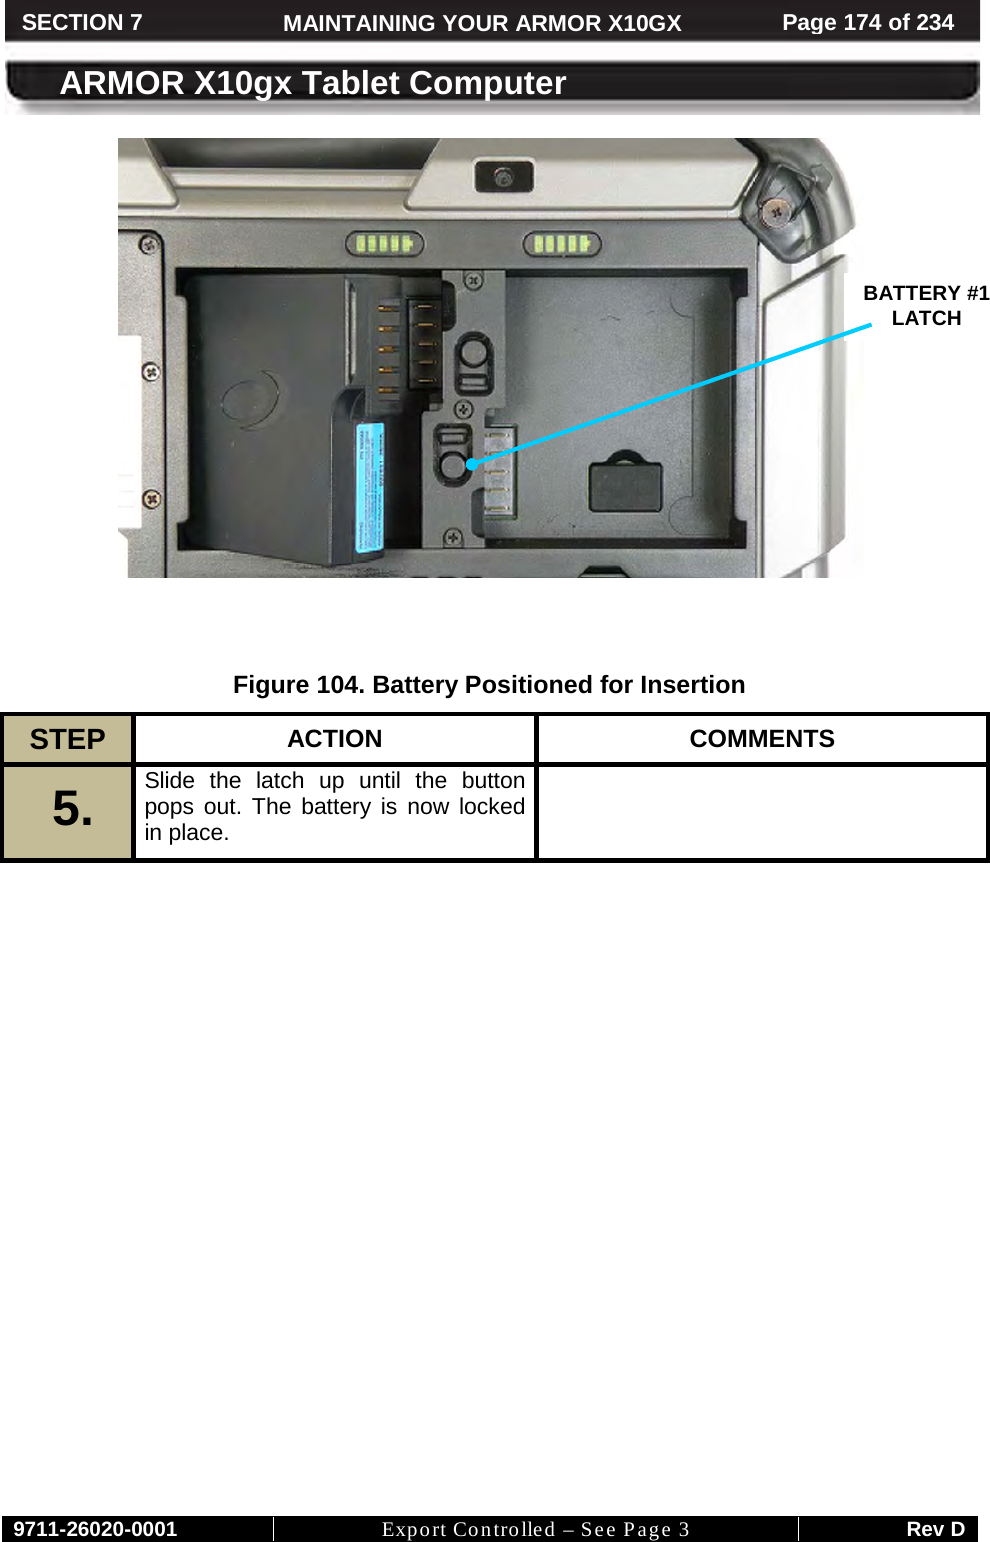     9711-26020-0001 Export Controlled – See Page 3 Rev D SECTION 7 MAINTAINING YOUR ARMOR X10GX Page 174 of 234  ARMOR X10gx Tablet Computer    Figure 104. Battery Positioned for Insertion STEP  ACTION COMMENTS 5.  Slide the latch up until the button pops out. The battery is now locked in place.     BATTERY #1  LATCH  